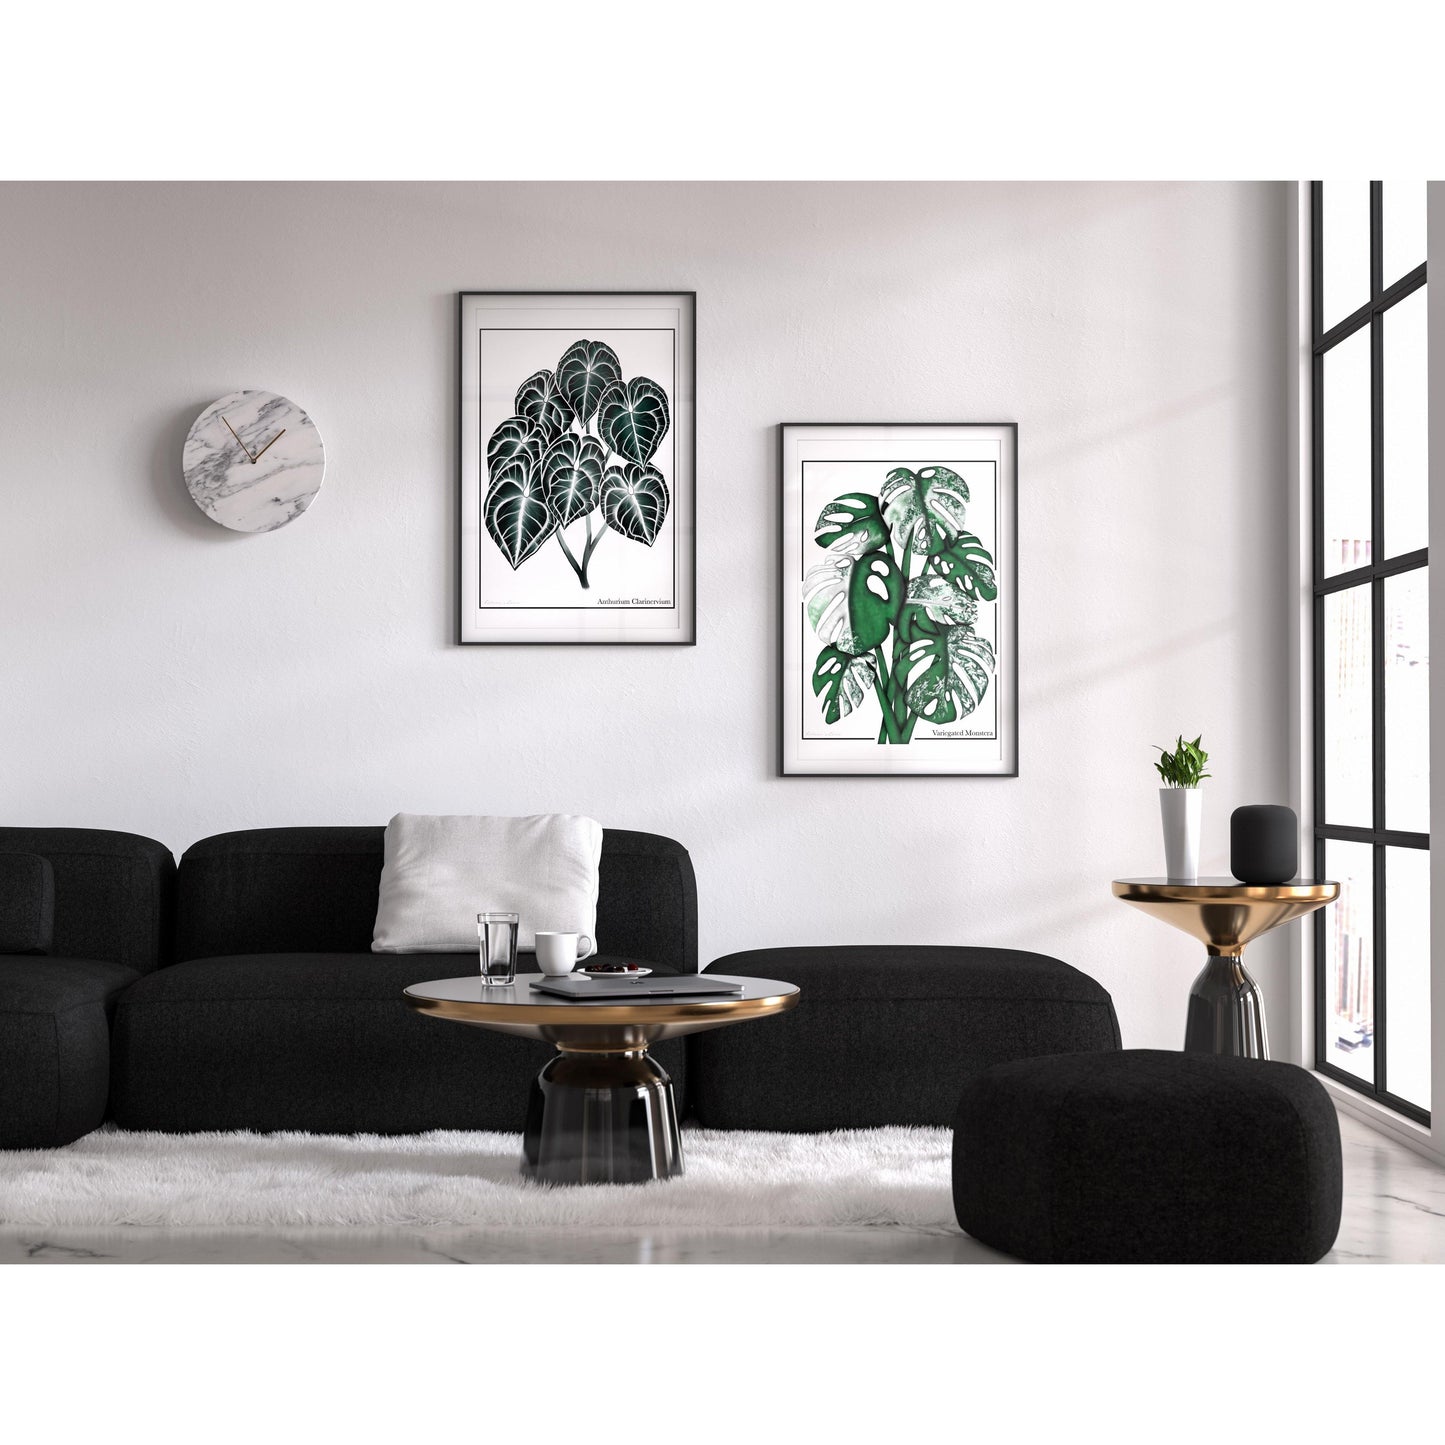 Anthurium Clarinervium and Monstera artwork framed and hanging side by side about a lounge in a vey modern setting